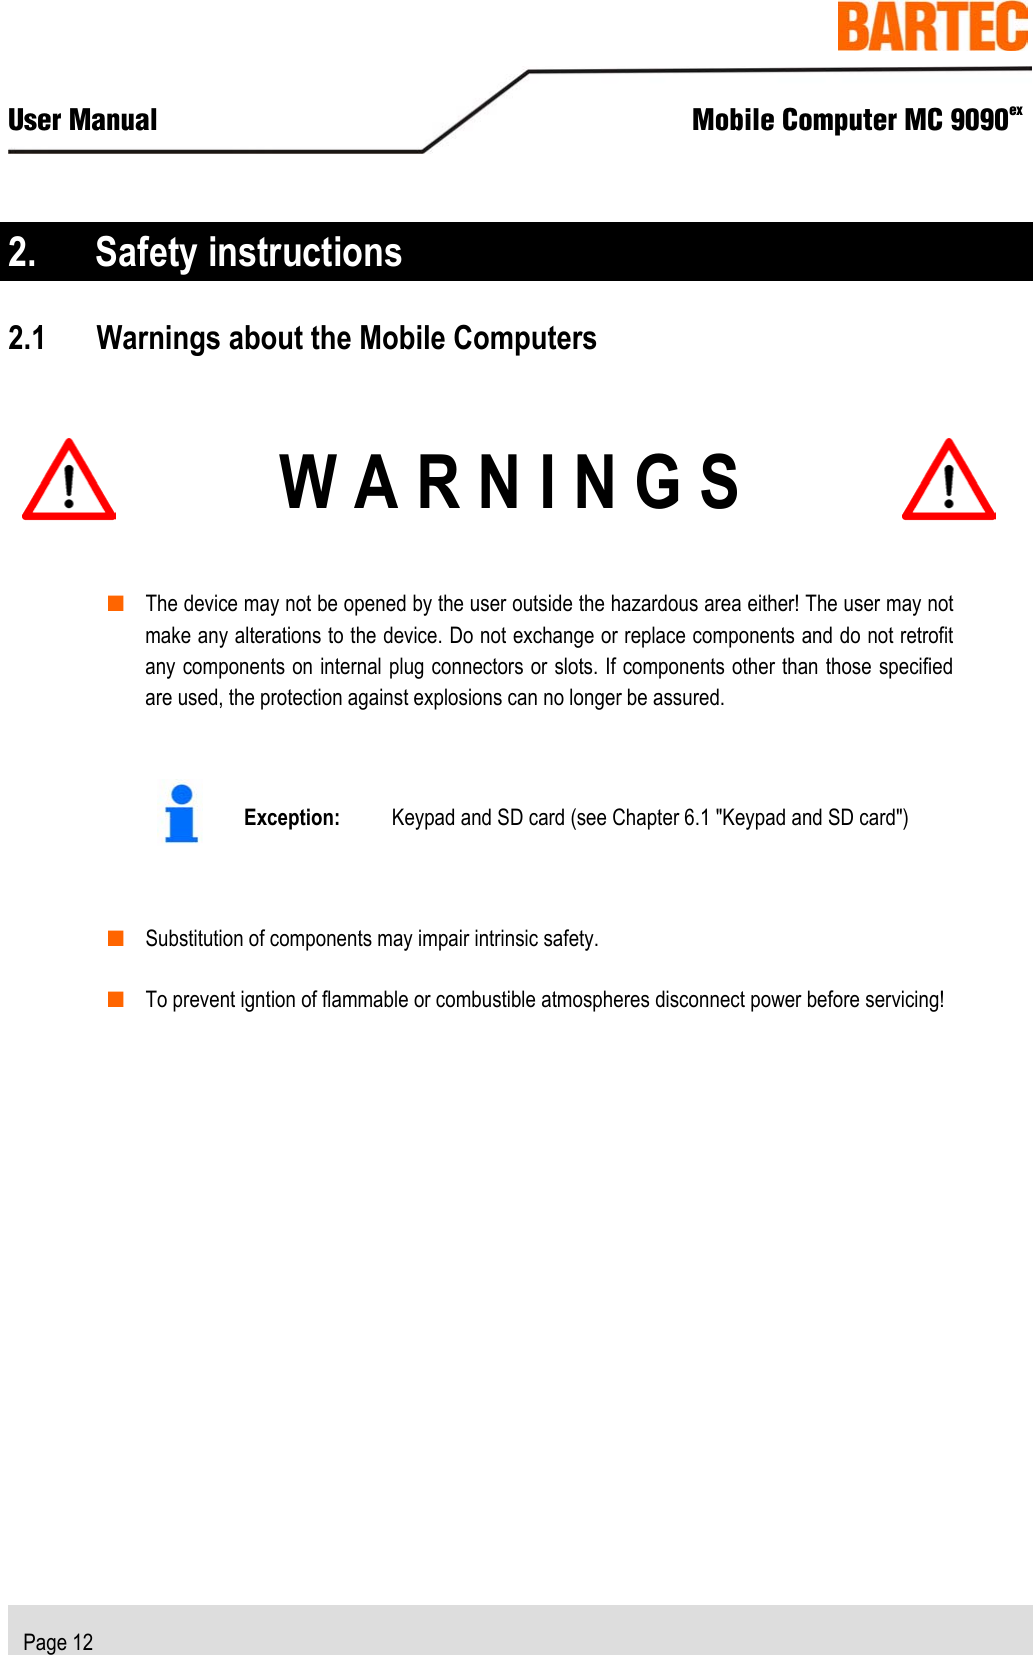  User Manual  Mobile Computer MC 9090ex   Page 12  2. Safety instructions 2.1 Warnings about the Mobile Computers   W A R N I N G S   ■ The device may not be opened by the user outside the hazardous area either! The user may not make any alterations to the device. Do not exchange or replace components and do not retrofit any components on internal plug connectors or slots. If components other than those specified are used, the protection against explosions can no longer be assured.    Exception:  Keypad and SD card (see Chapter 6.1 &quot;Keypad and SD card&quot;)  ■ Substitution of components may impair intrinsic safety. ■ To prevent igntion of flammable or combustible atmospheres disconnect power before servicing!  